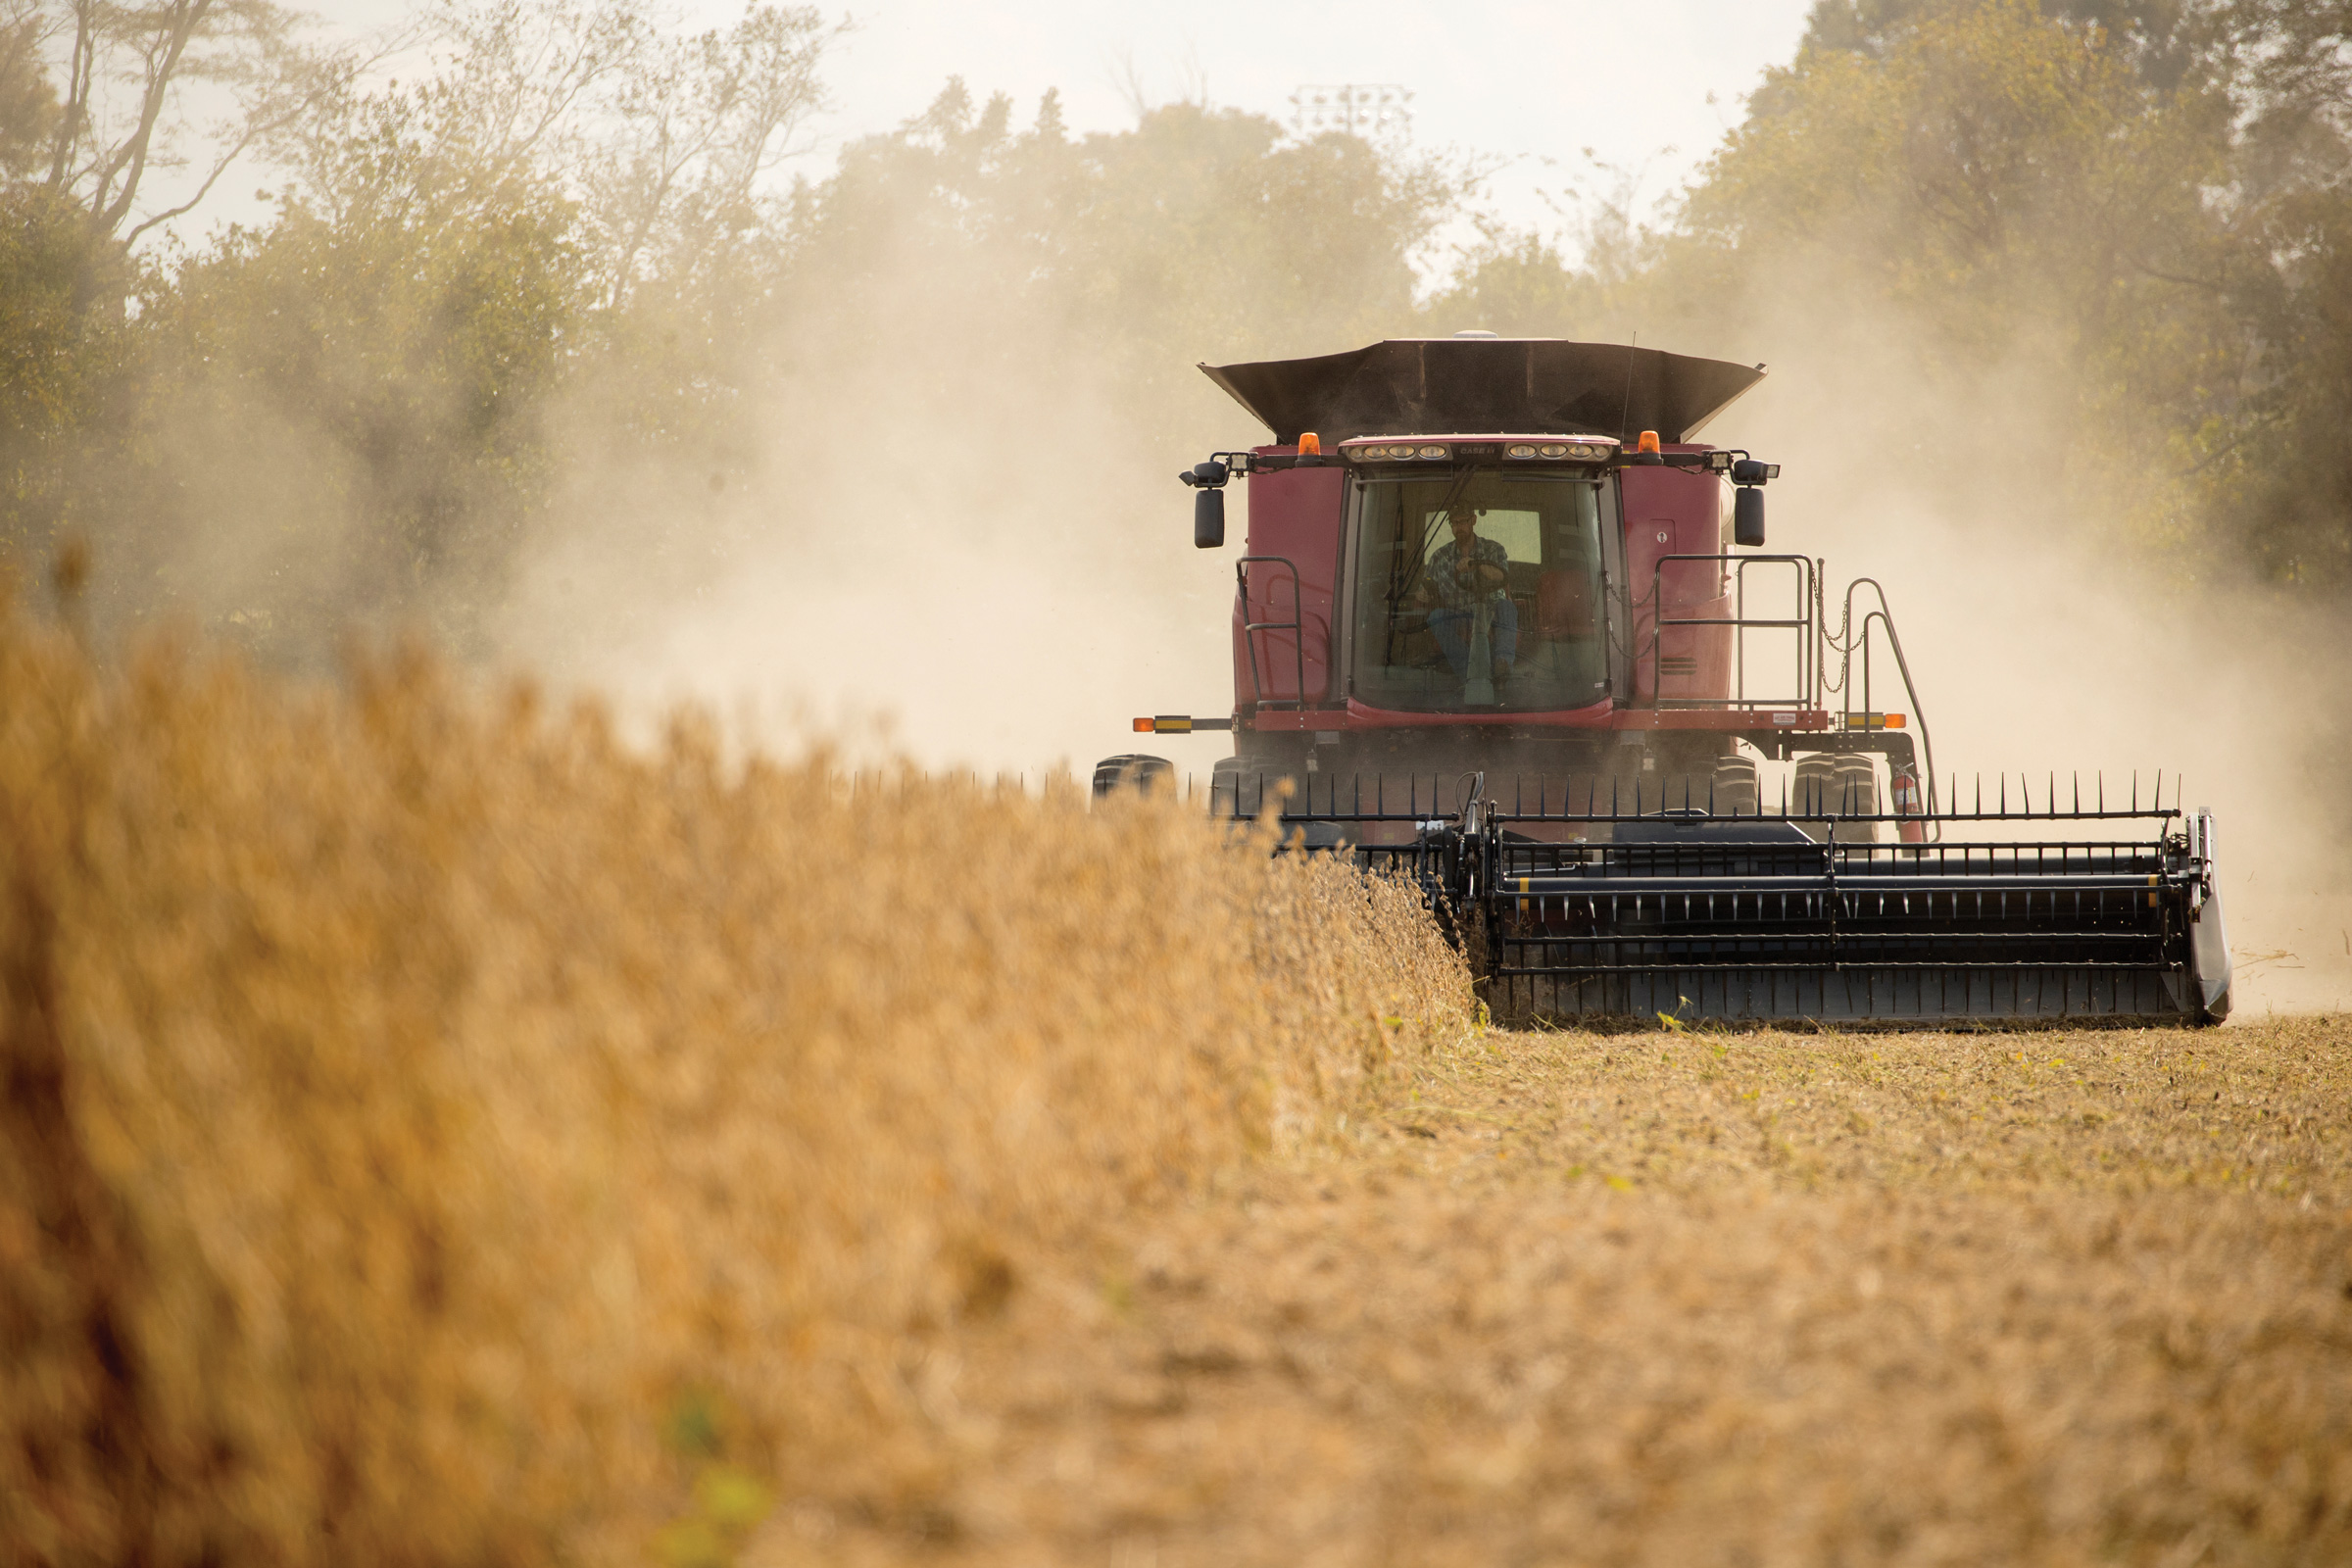 Large harvesting equipment drives over a golden soybean field gathering dust behind the machine